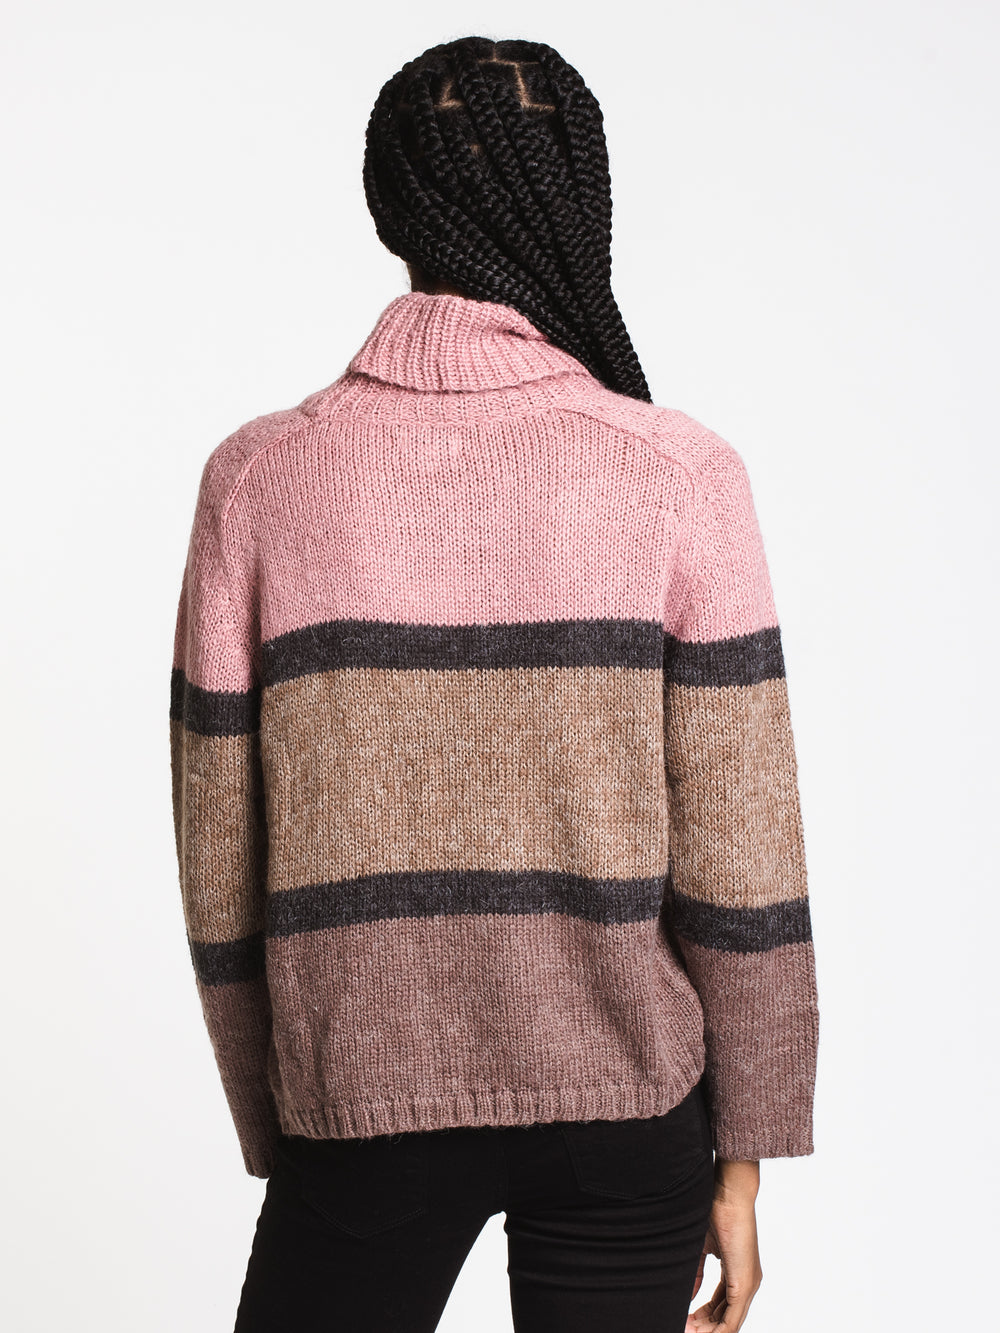 WOMENS SANDIS KNIT SWEATER - ROSE STRIPE - CLEARANCE